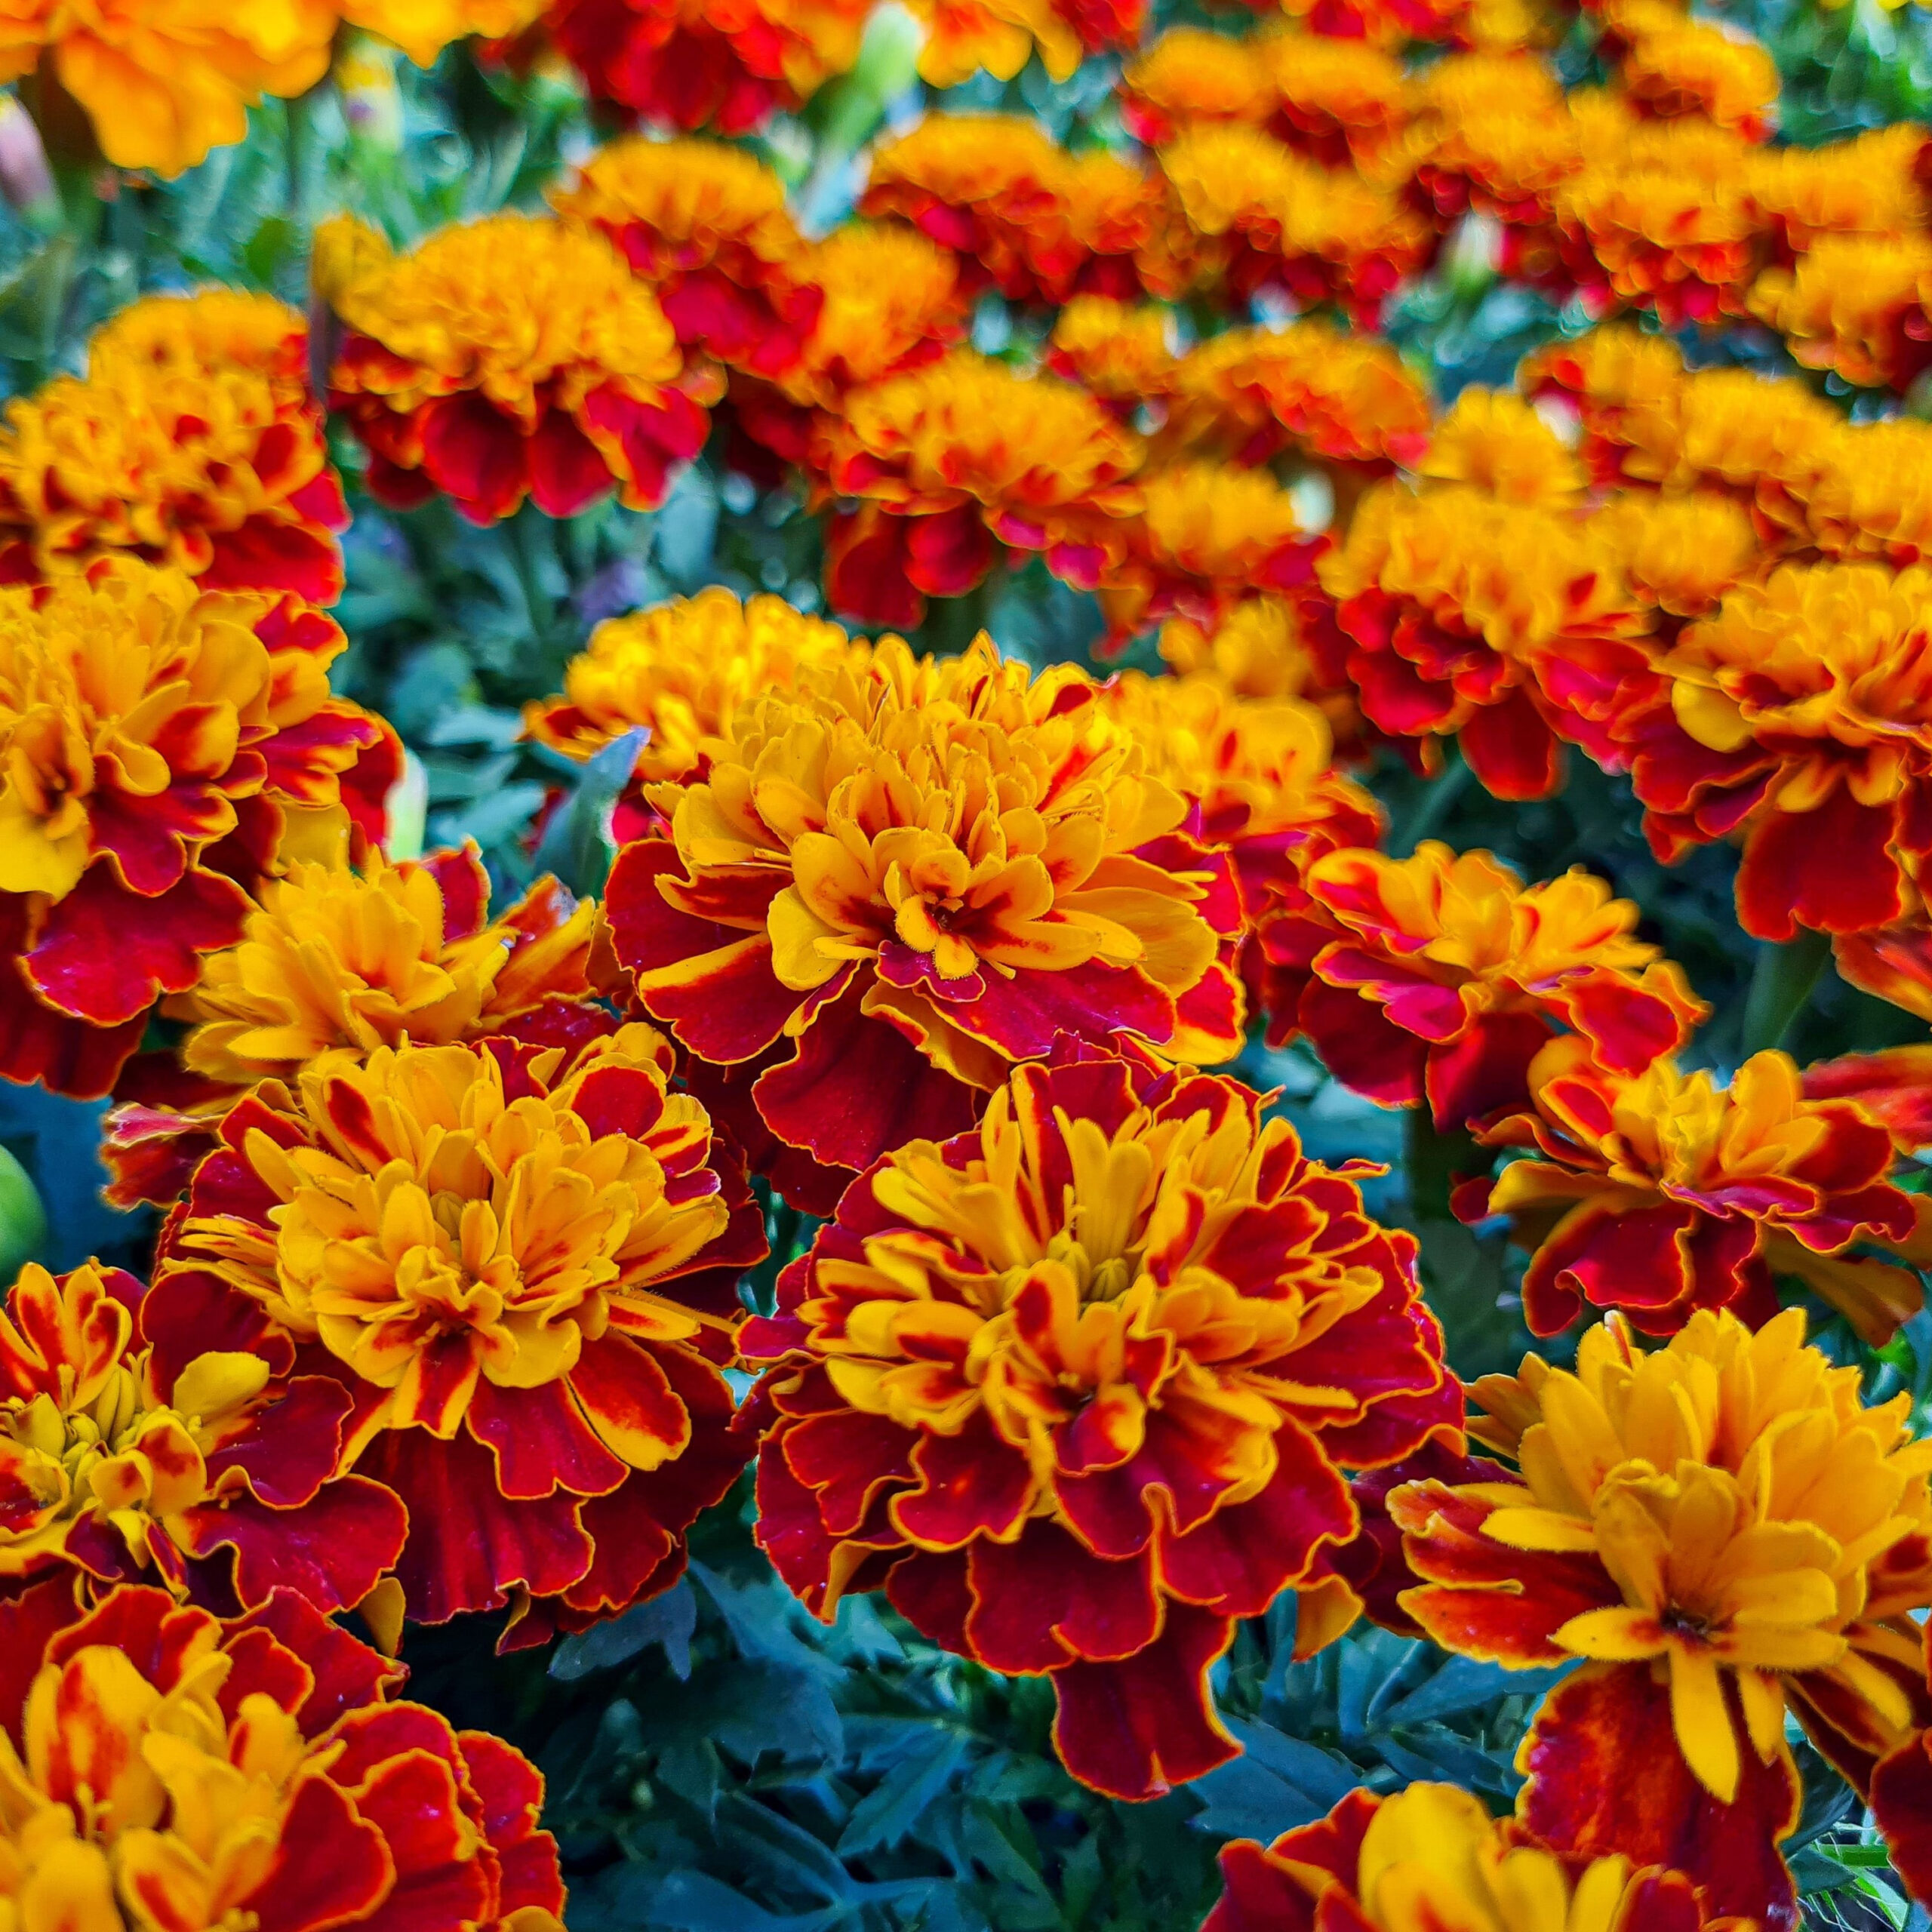 How To Keep Marigolds Blooming Big - 3 Secrets To More Blooms!